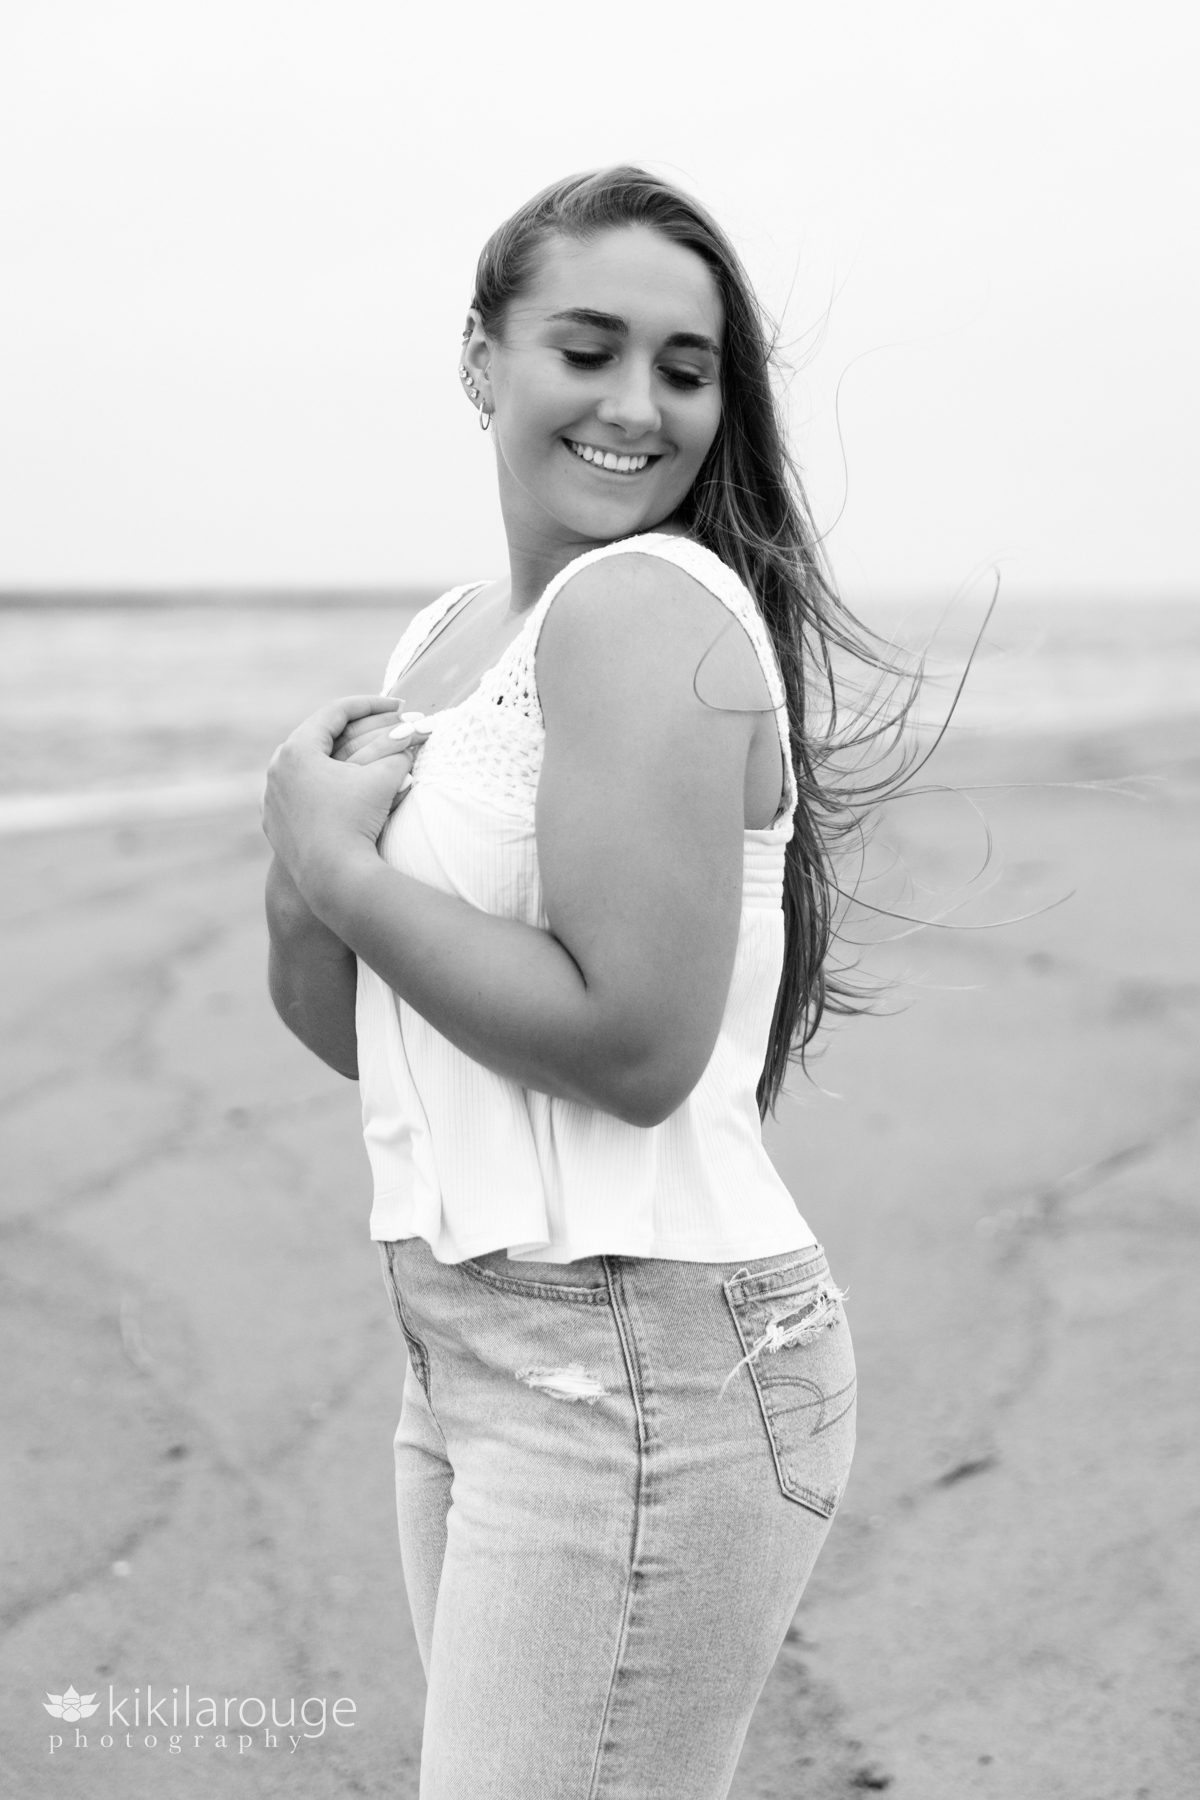 Triton Senior Portrait Girl in Jeans with white top tied in back at beach BW looking down in jeans